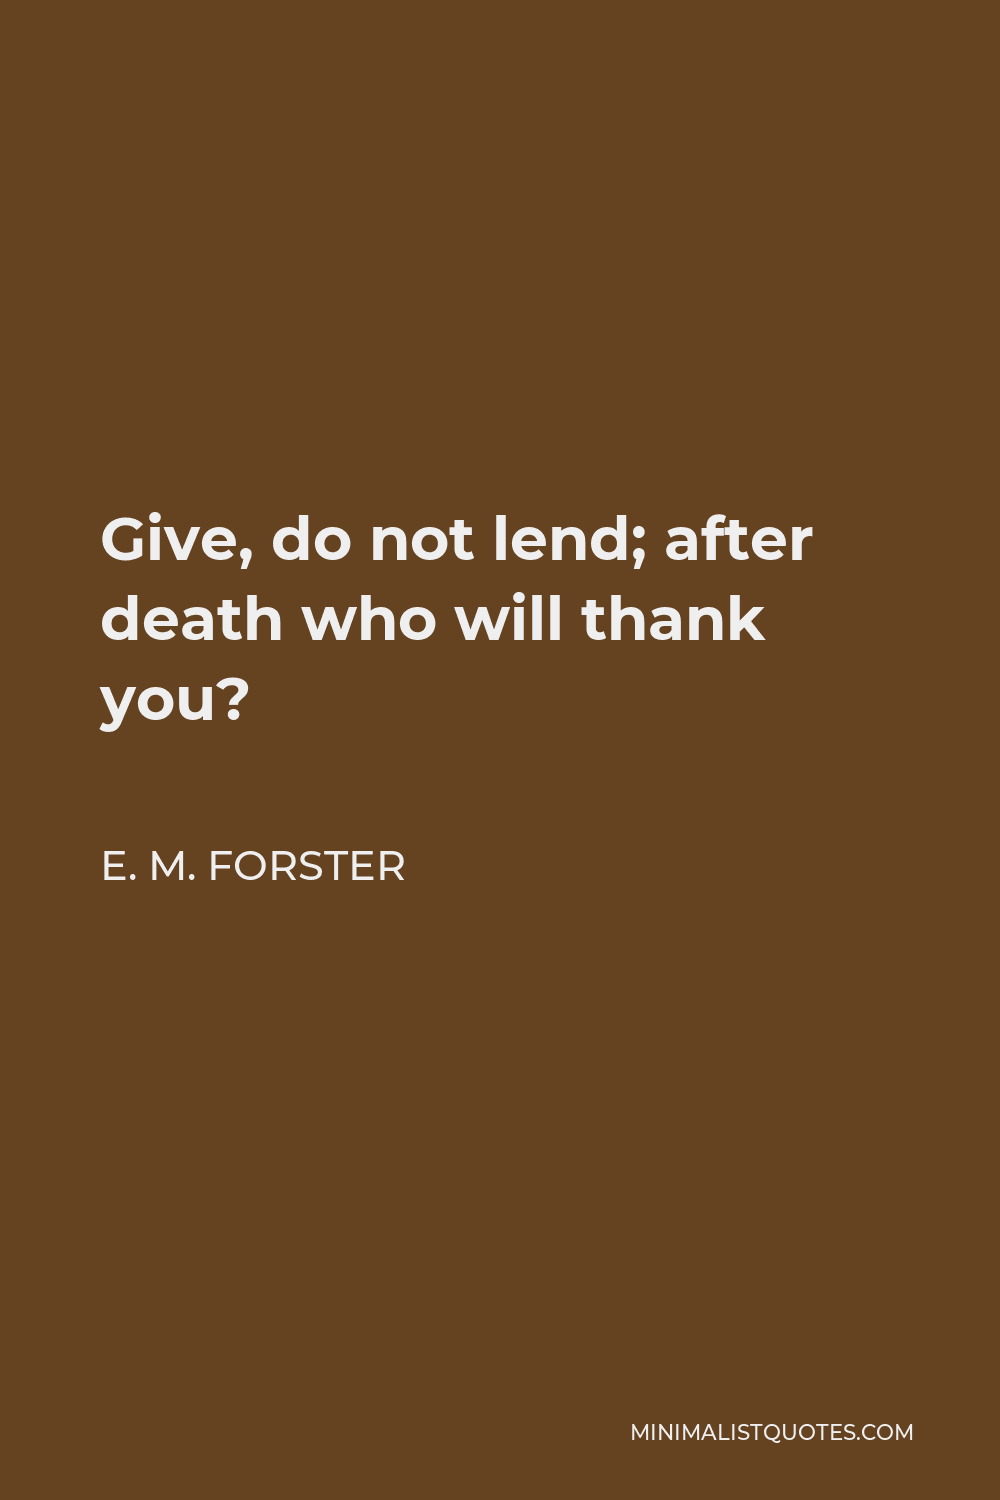 E. M. Forster Quote - Give, do not lend; after death who will thank you?